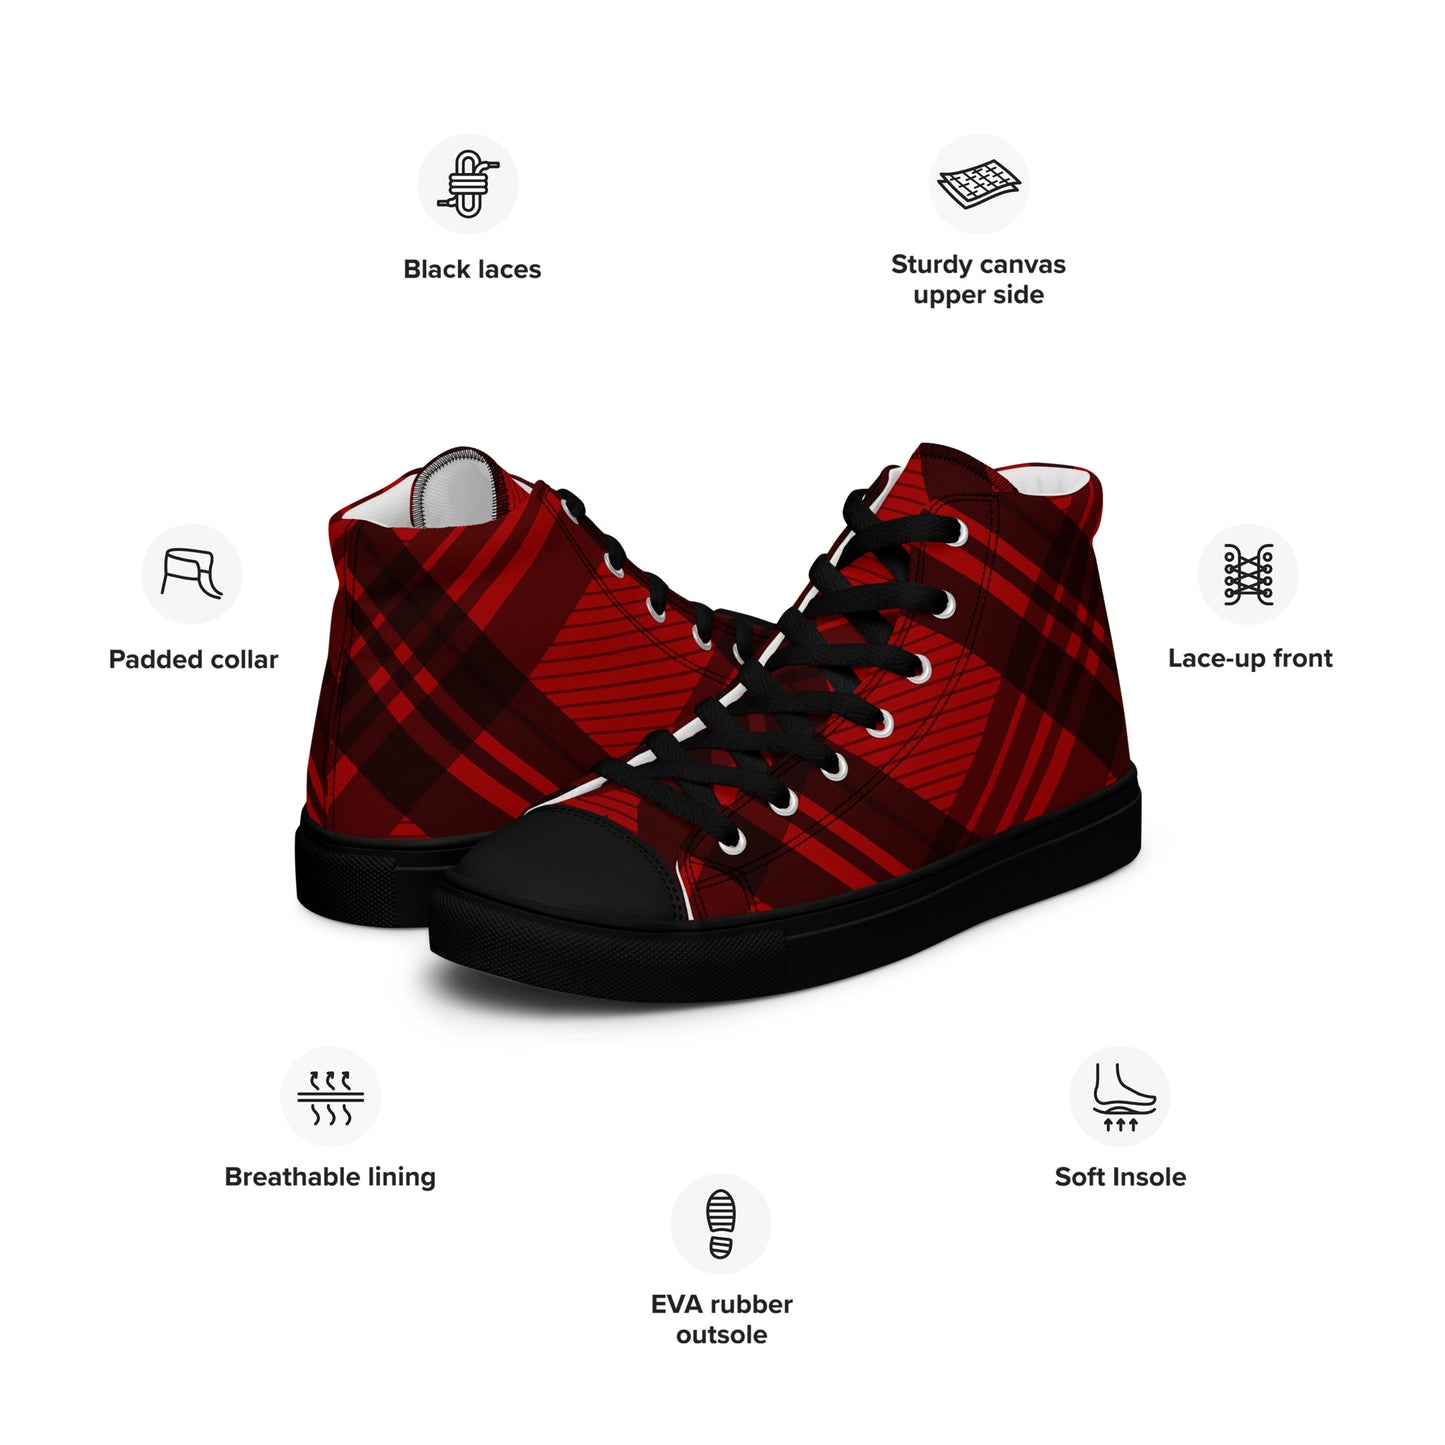 WOMEN'S RED PLAID HIGH TOP CANVAS SHOES